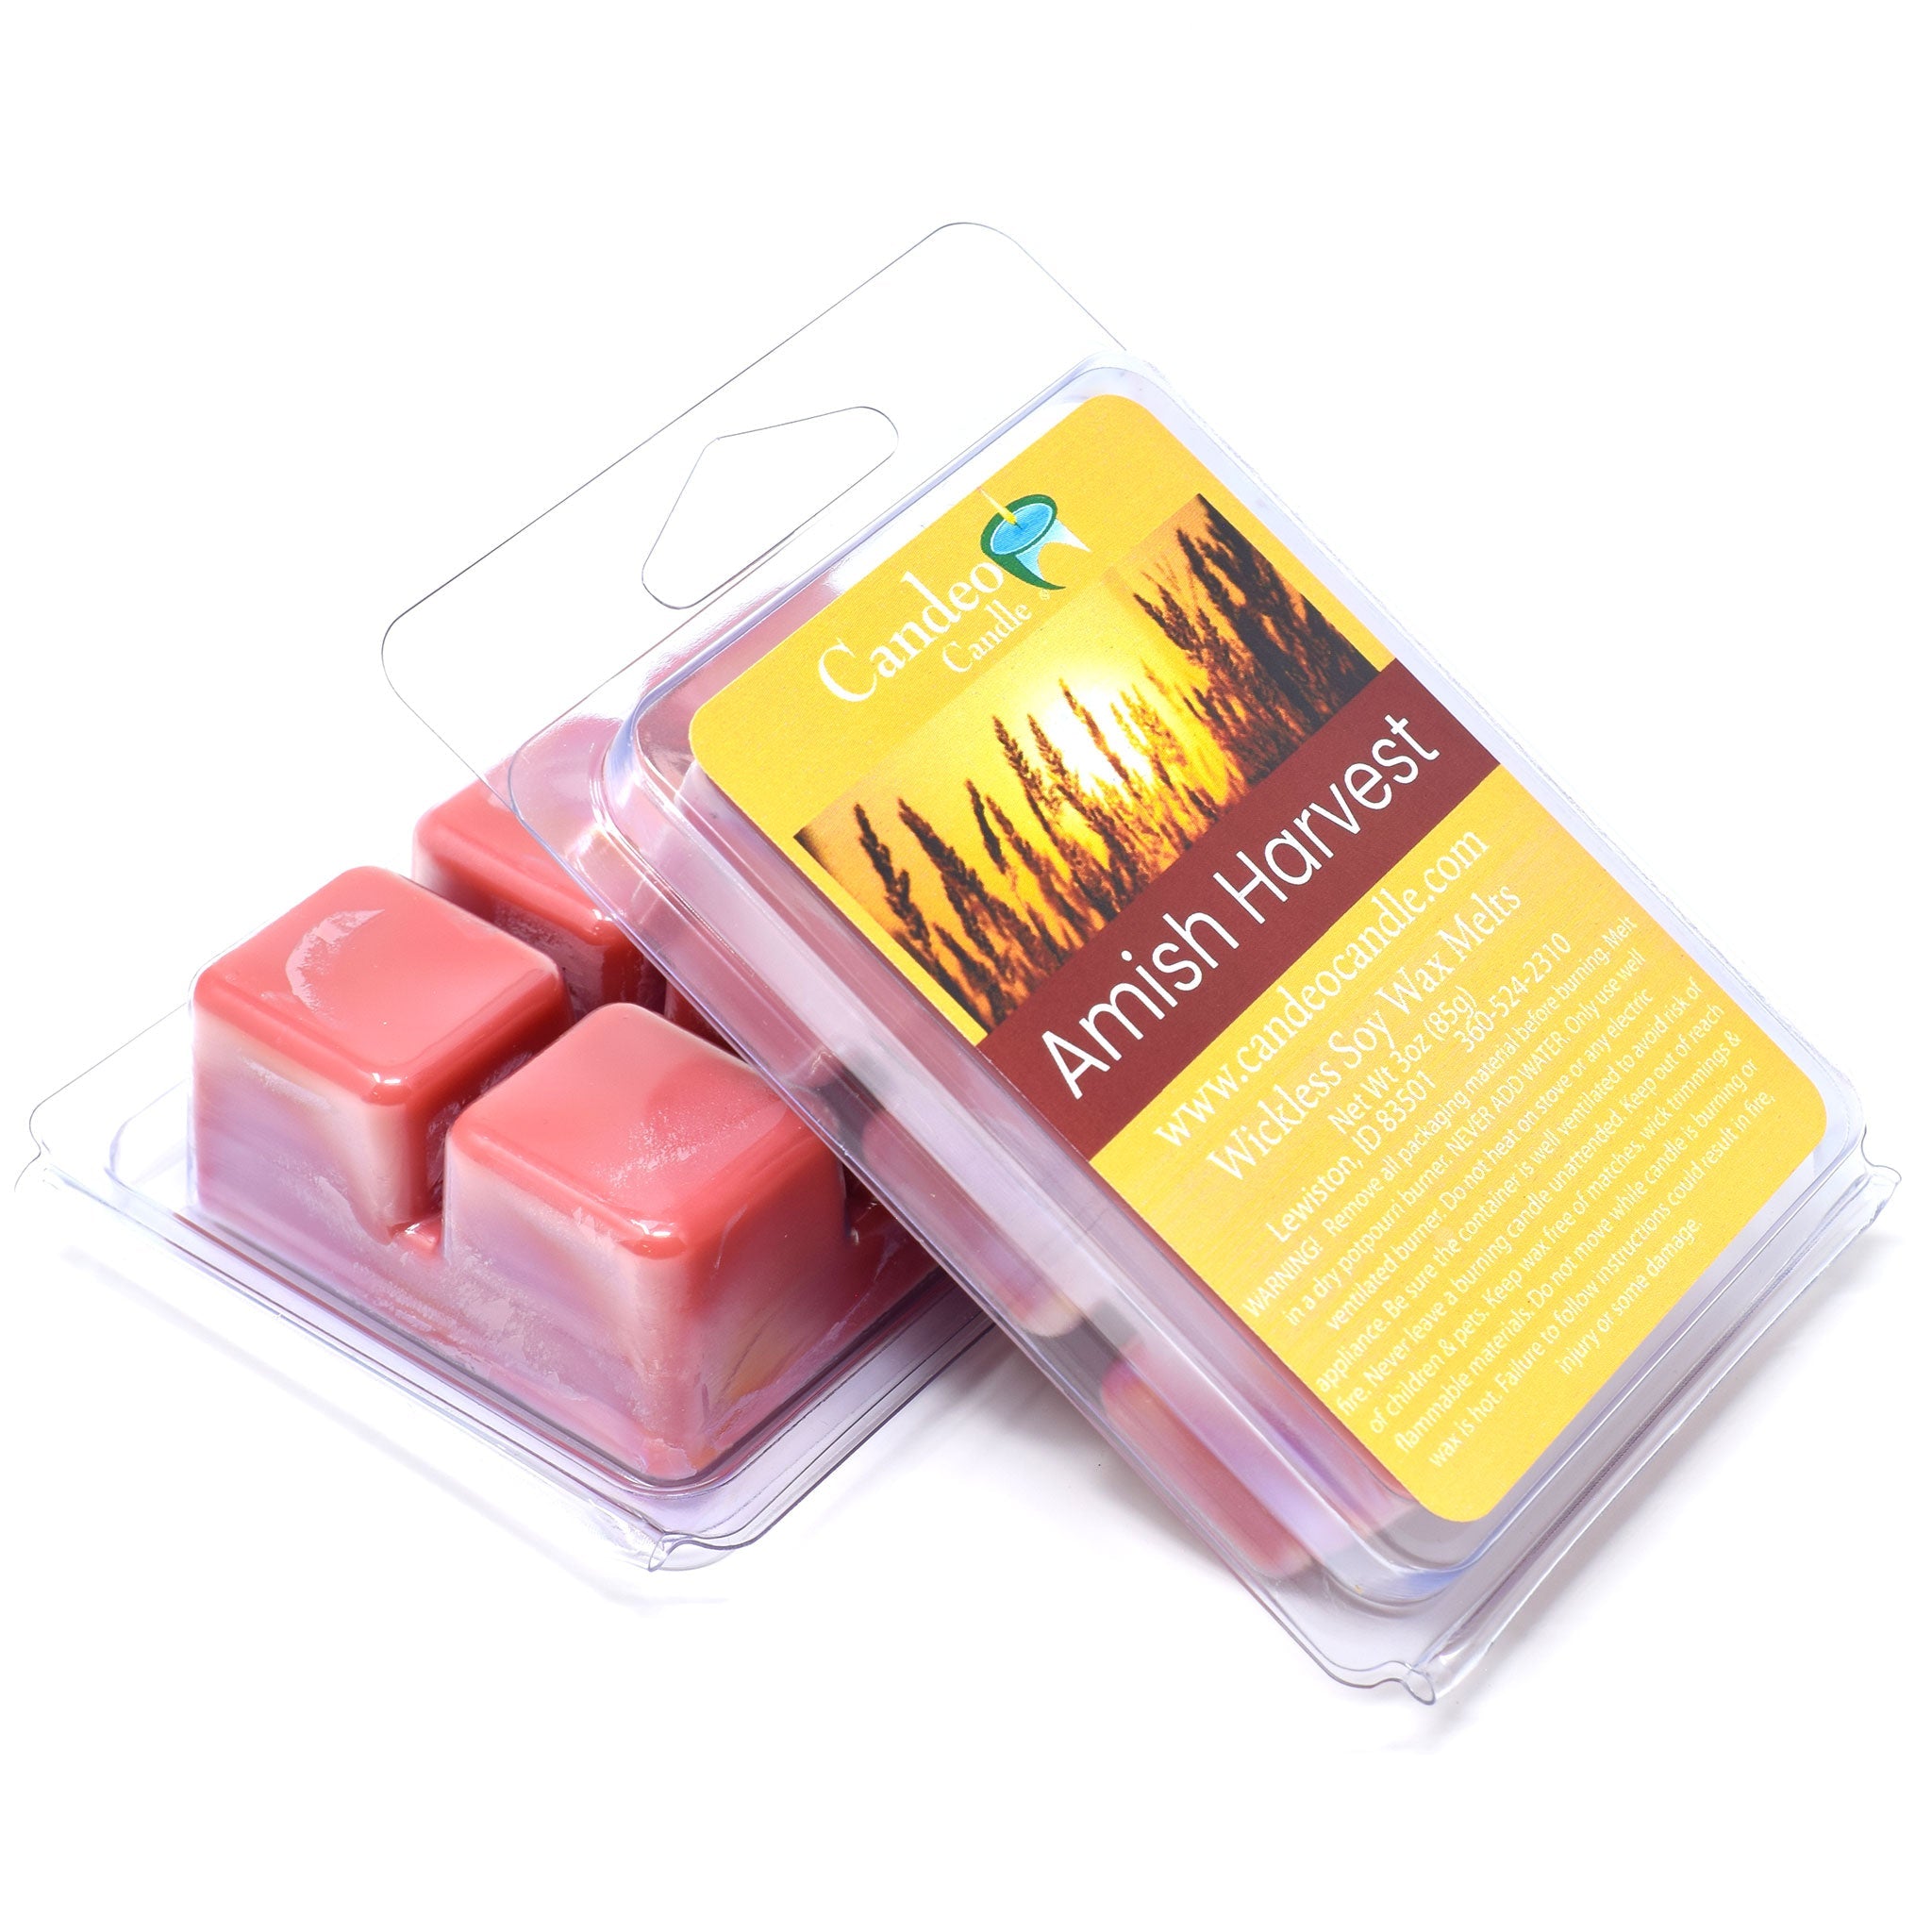 Amish Harvest, Soy Melt Cubes, 2-Pack - Candeo Candle